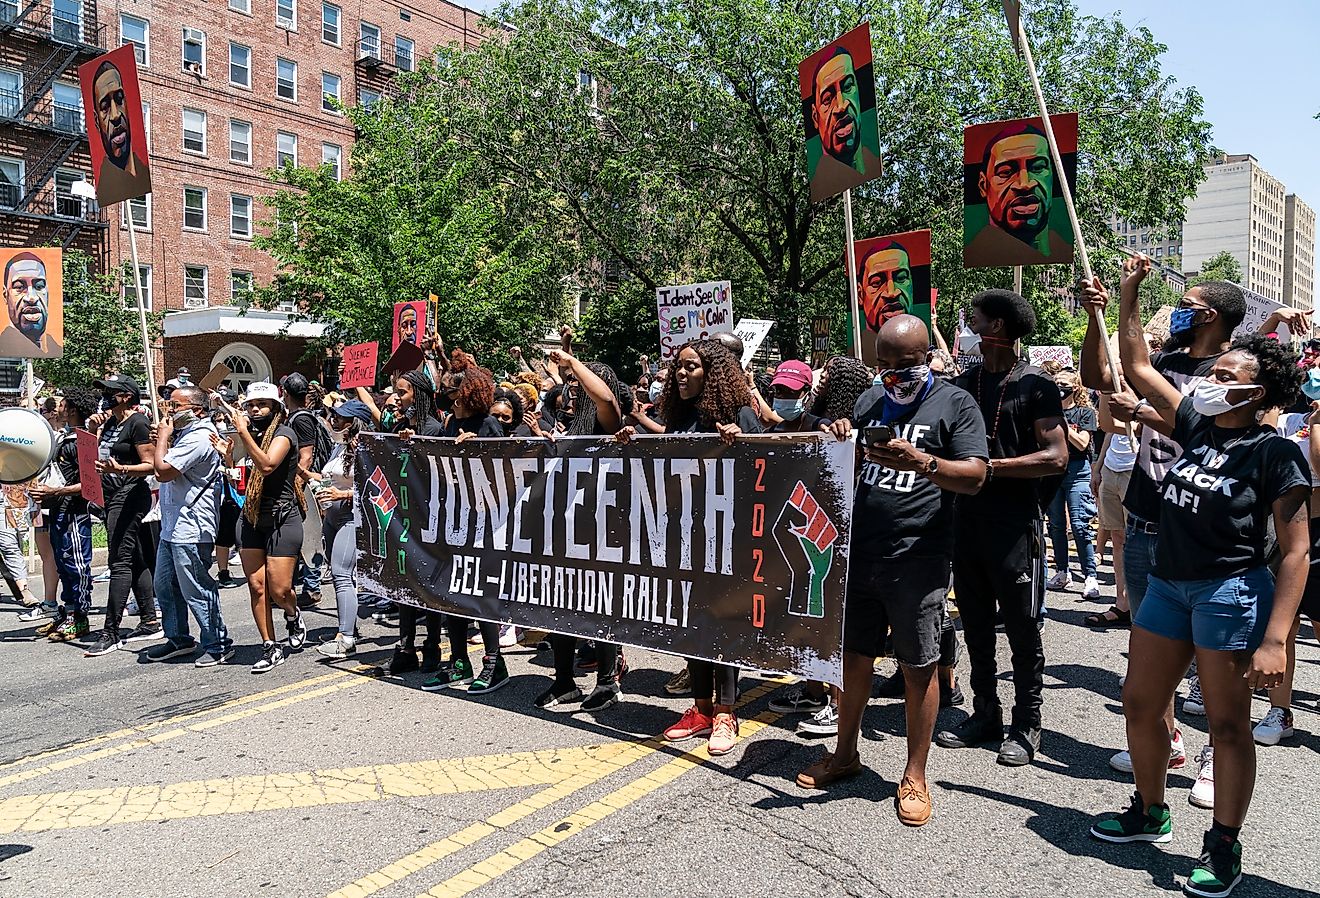 Juneteenth celebration at Brooklyn Public Library at the Grand Army Plaza, New York. Image credit lev radin via Shutterstock